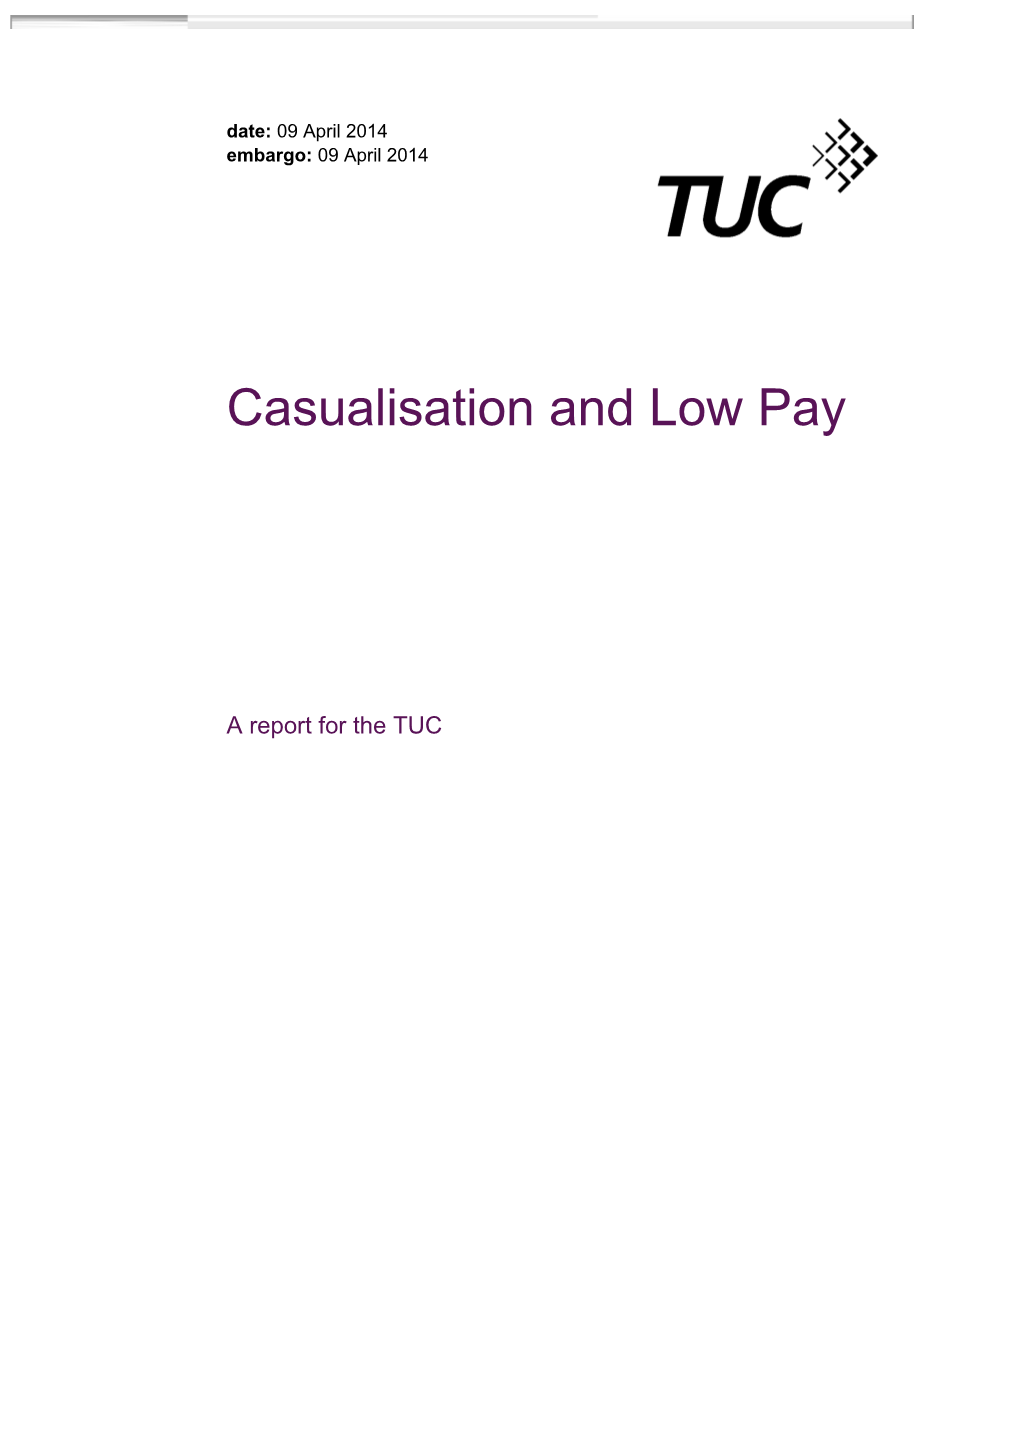 7 Casualisation, Low Pay and Working Hours